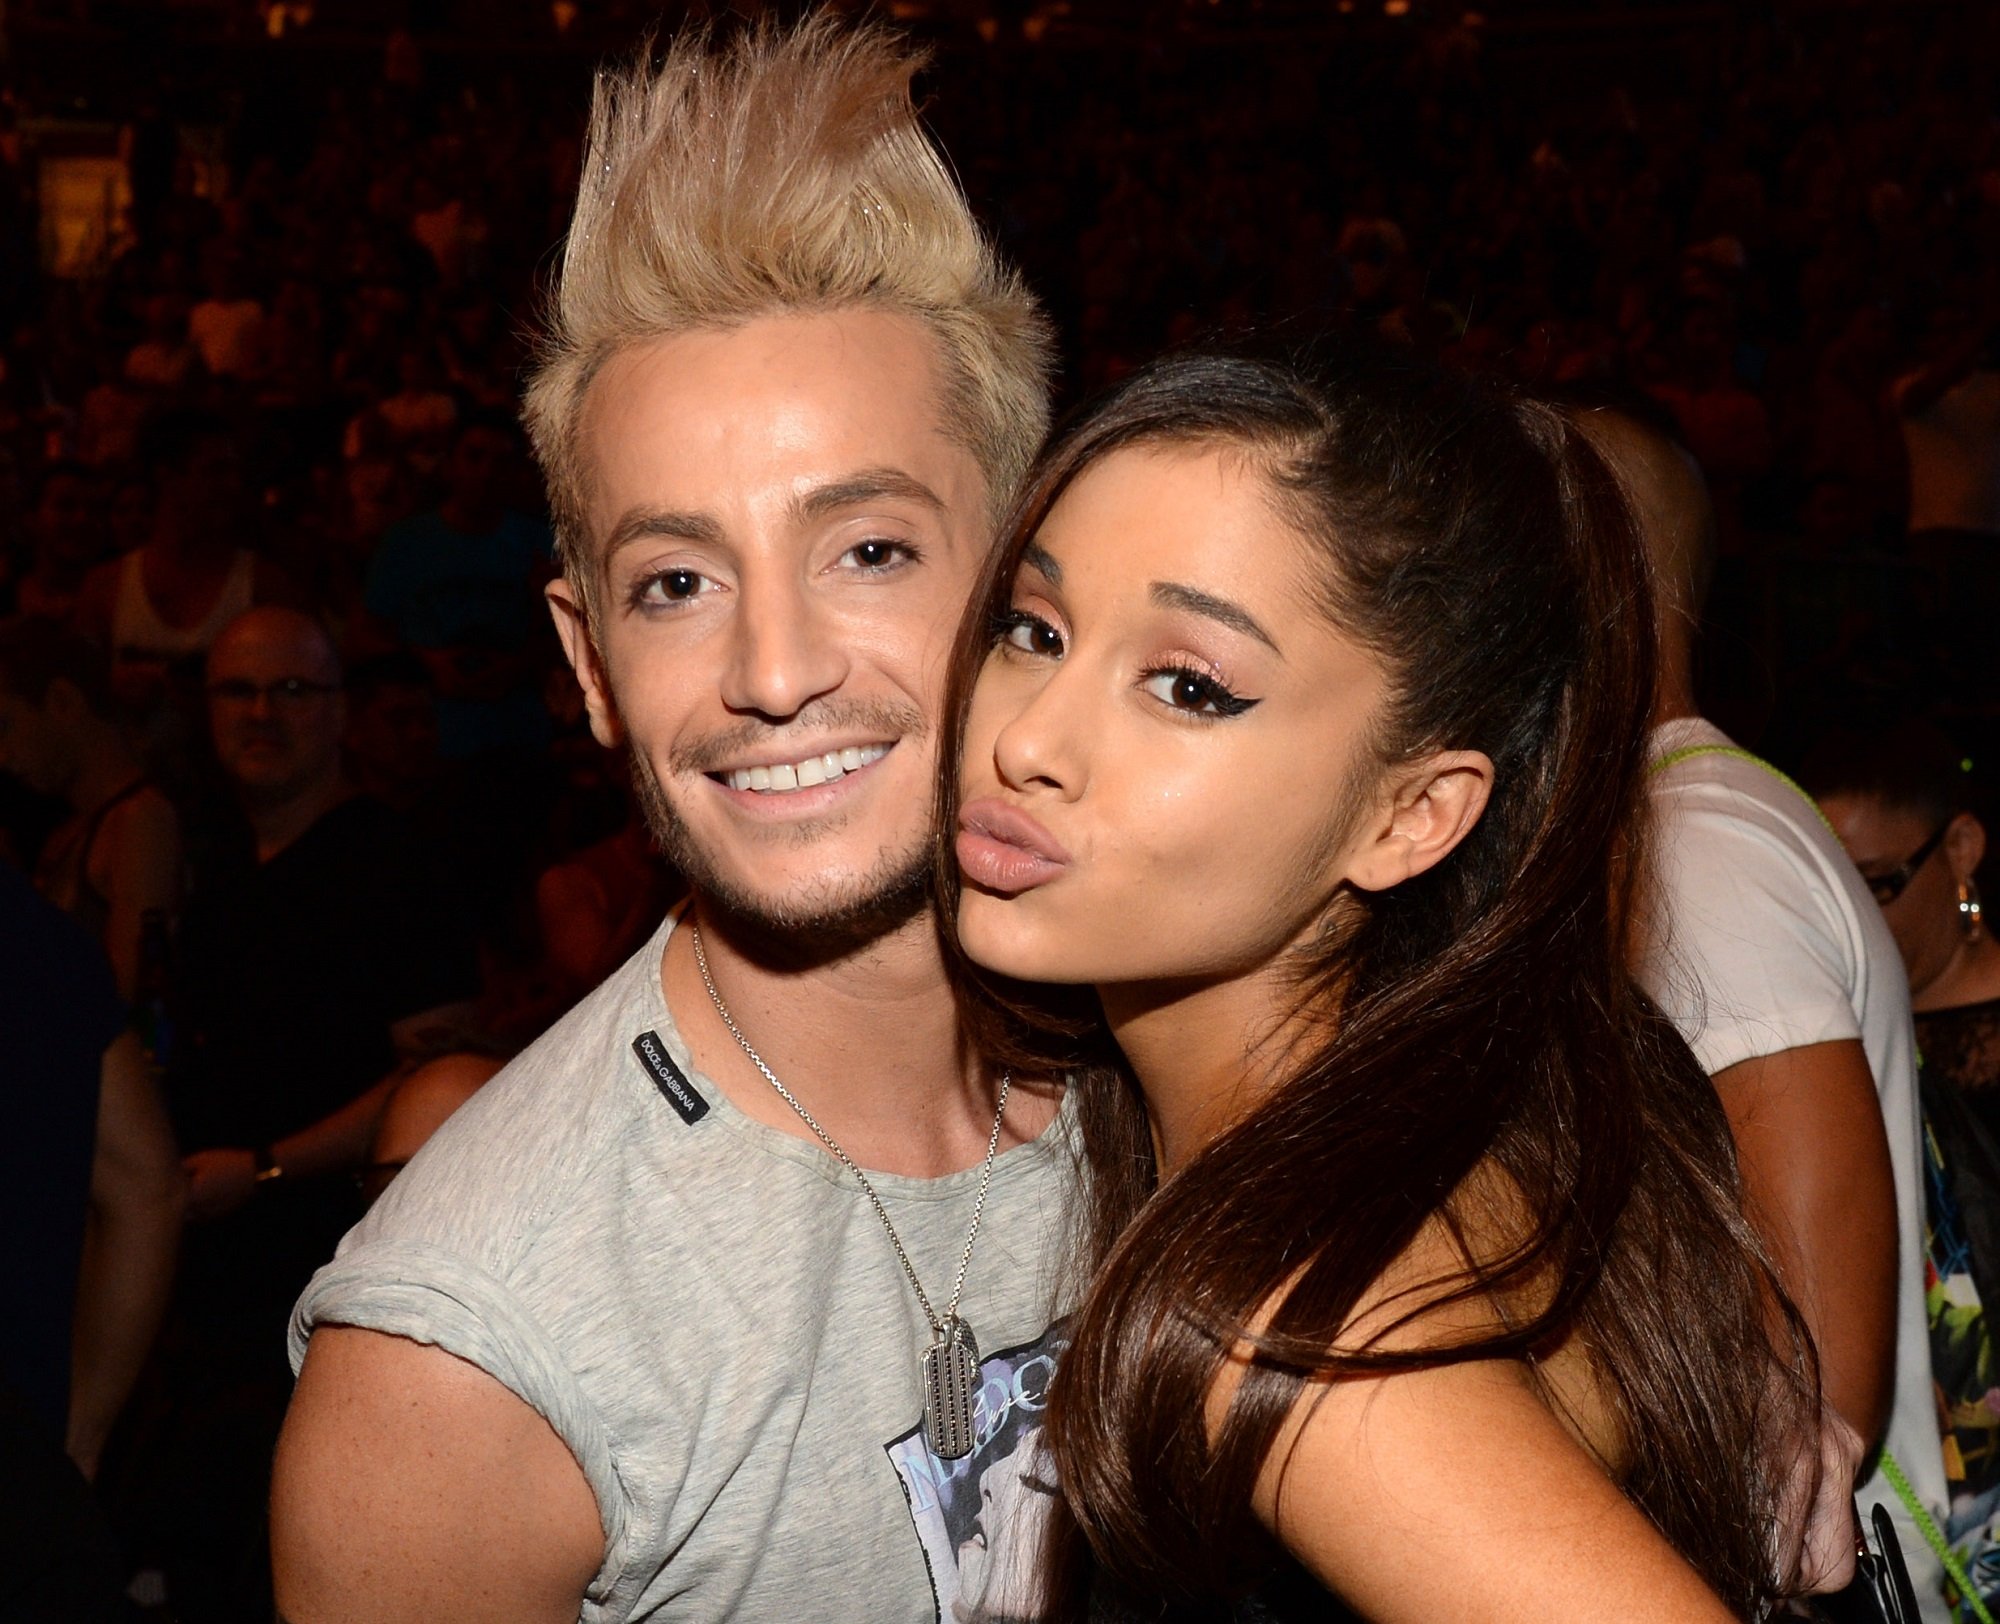 What Ariana Grande S Brother Frankie Has Said About Her Boyfriends Ariana grande got her ears pierced when she was a baby. what ariana grande s brother frankie has said about her boyfriends